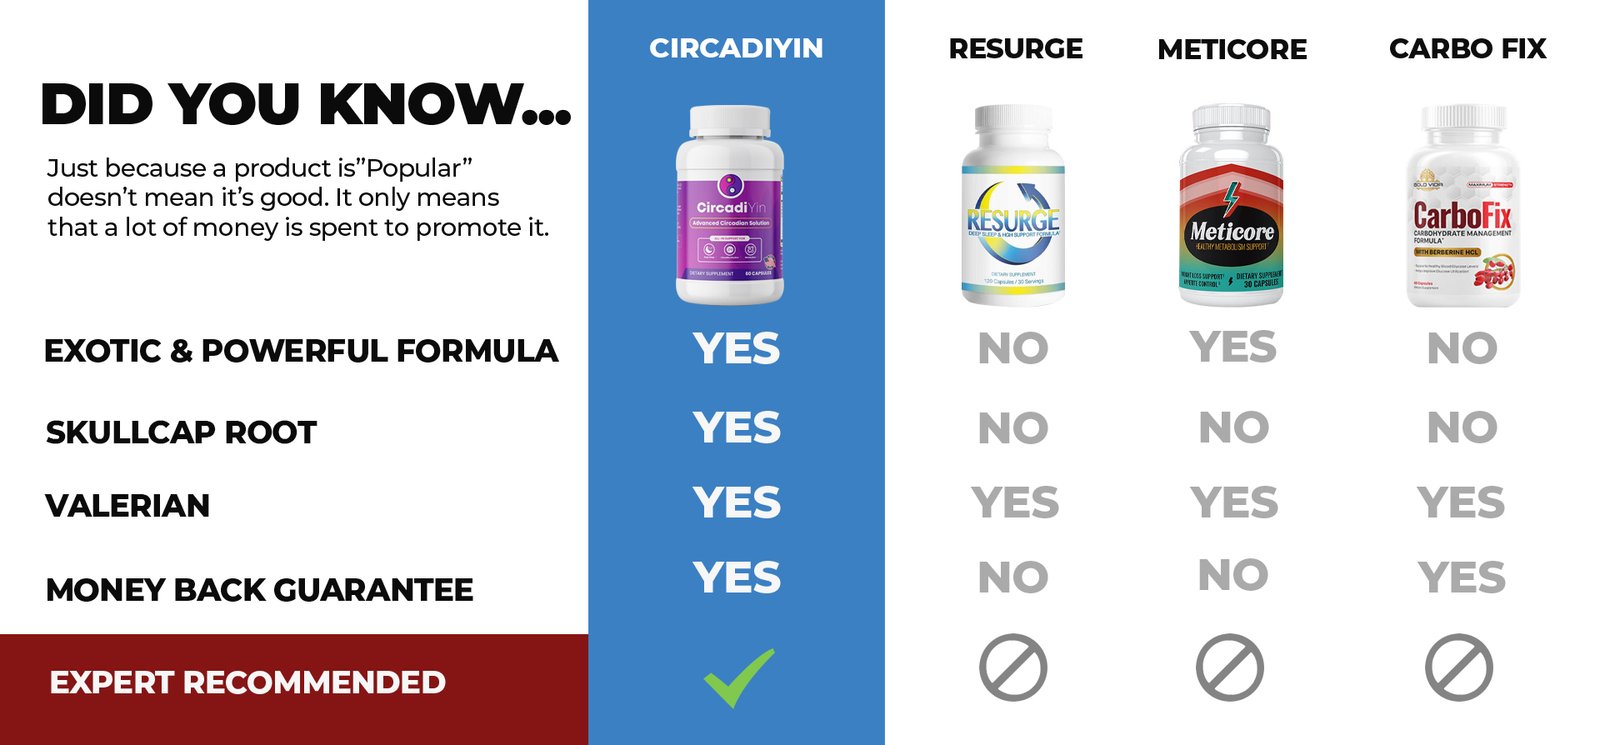 CircadiYin Reviews (Updated) - I Tried It For 30 Days! Here's My Results.